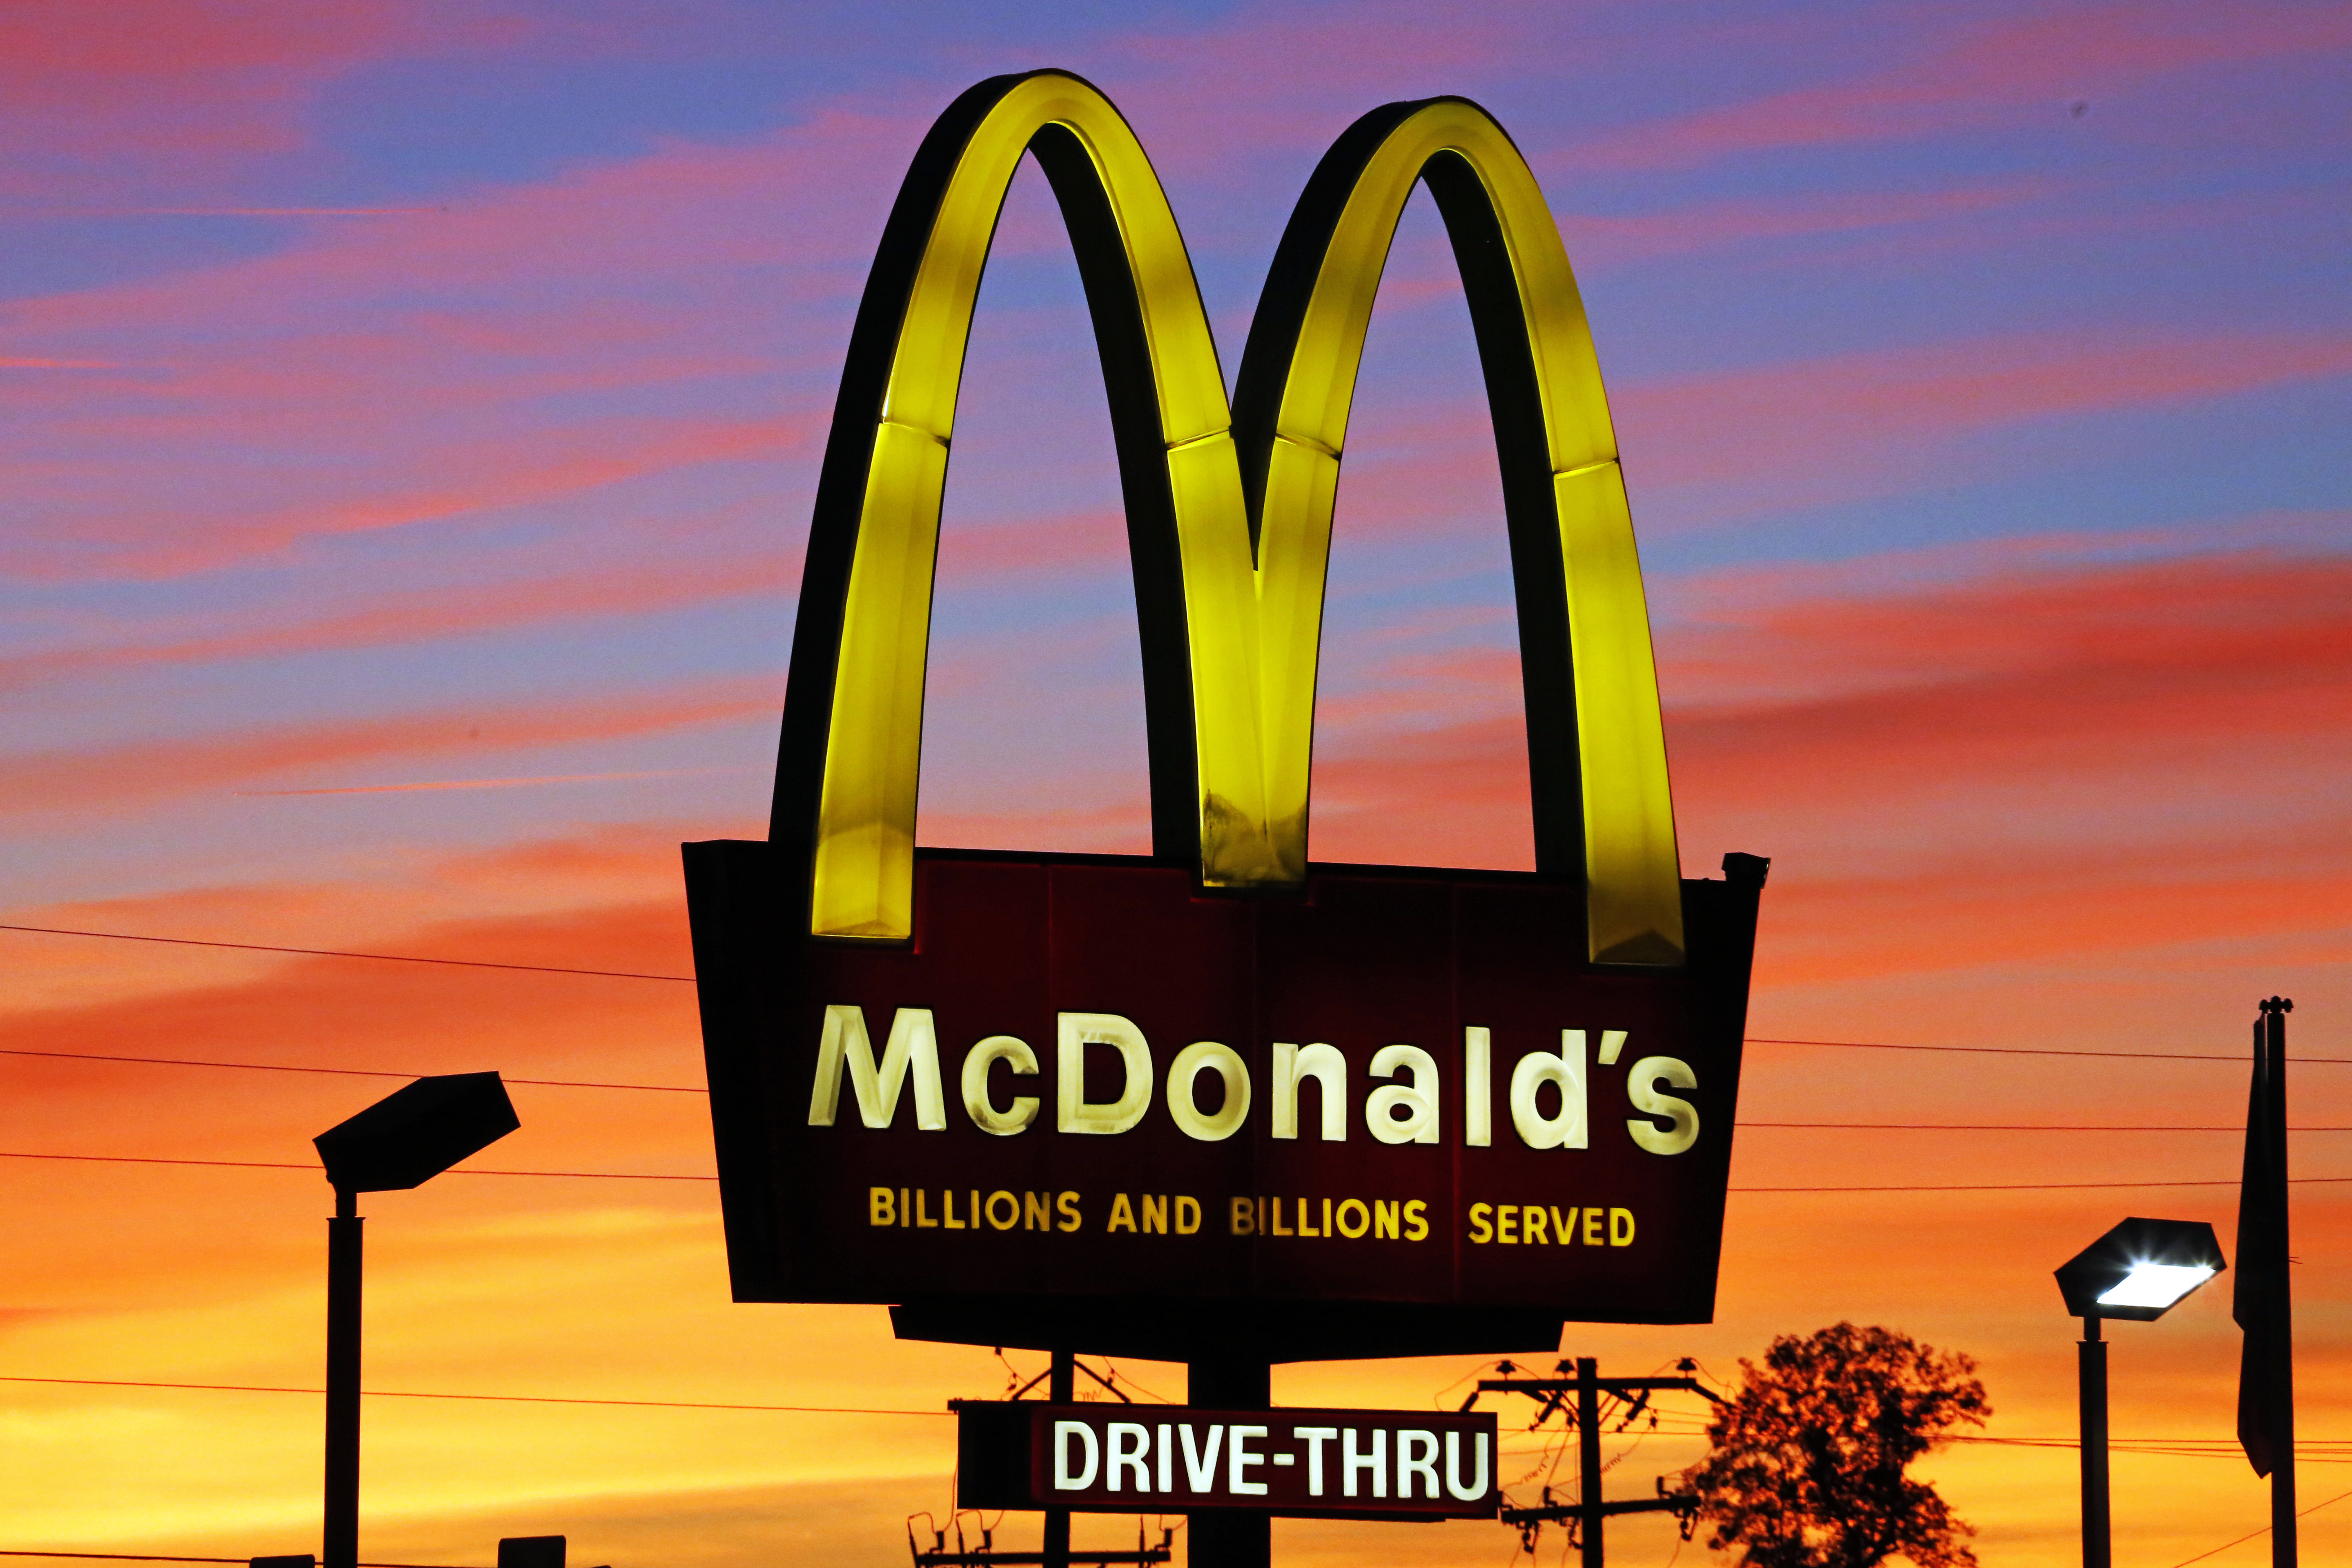 McDonald's will roll out a $5 bundle meal starting in late June in hopes of enticing customers to return to the fast food chain.